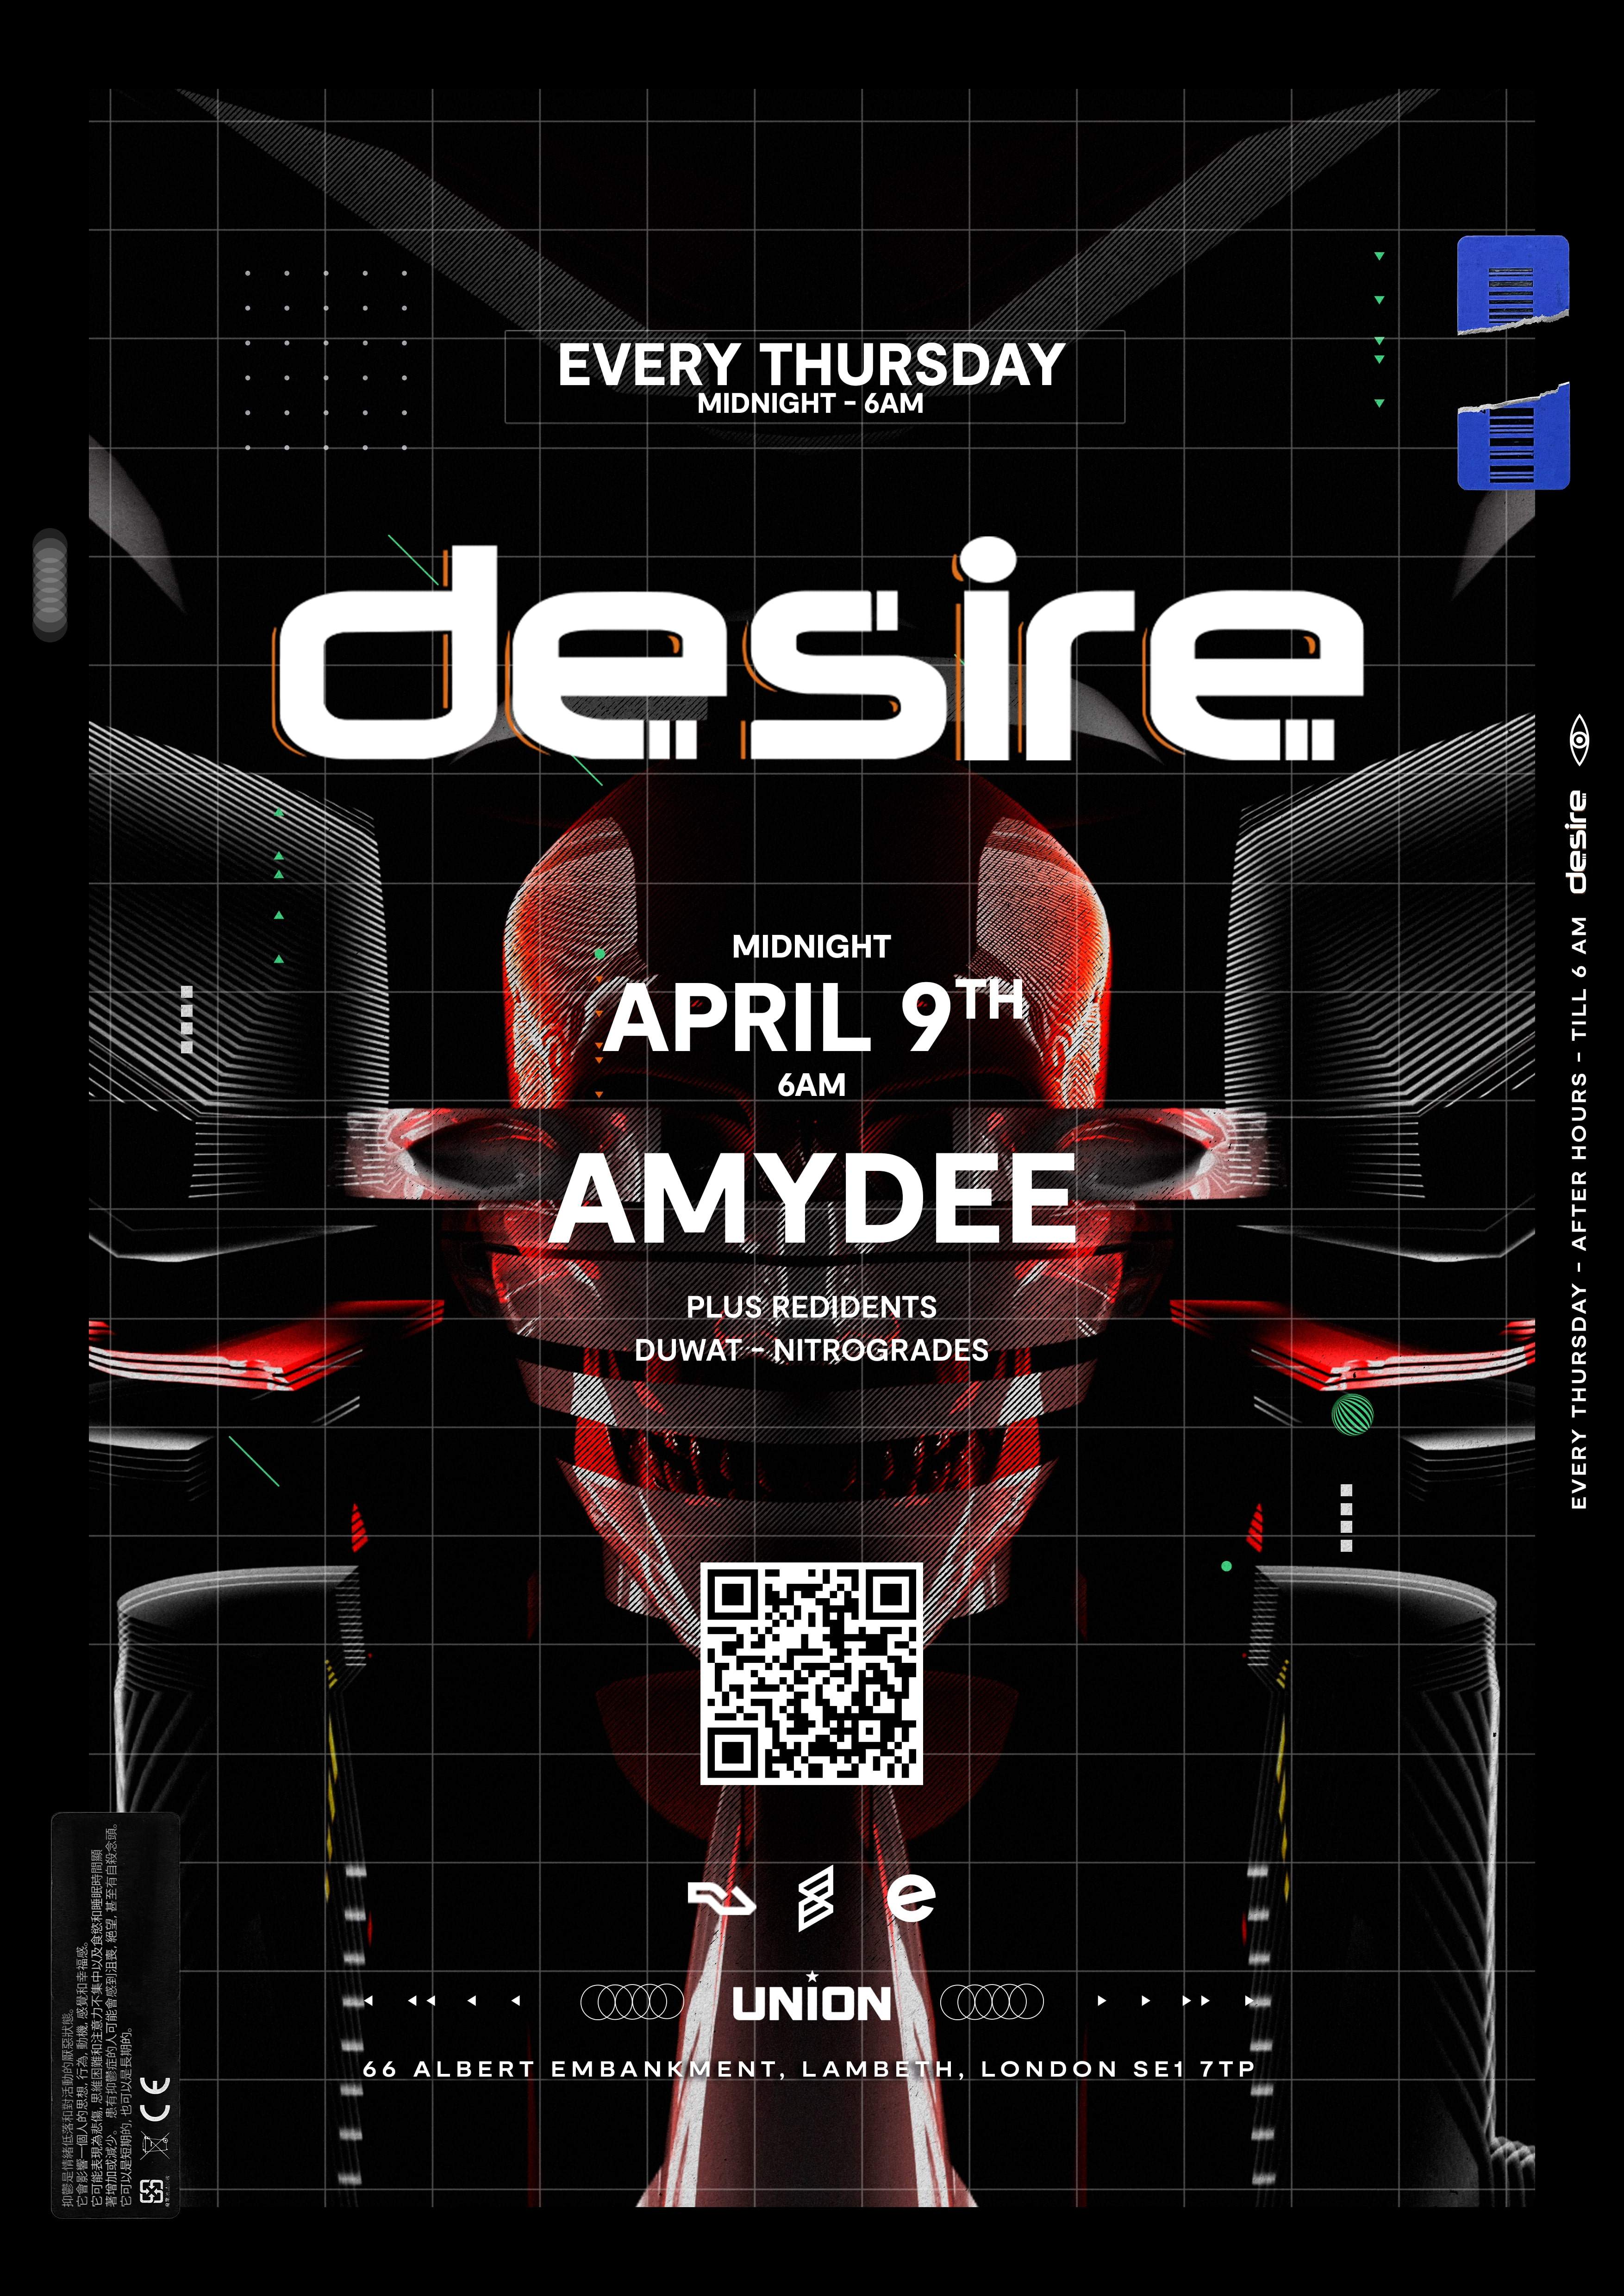 Desire (Your Weekly Thursday After Party) - フライヤー裏